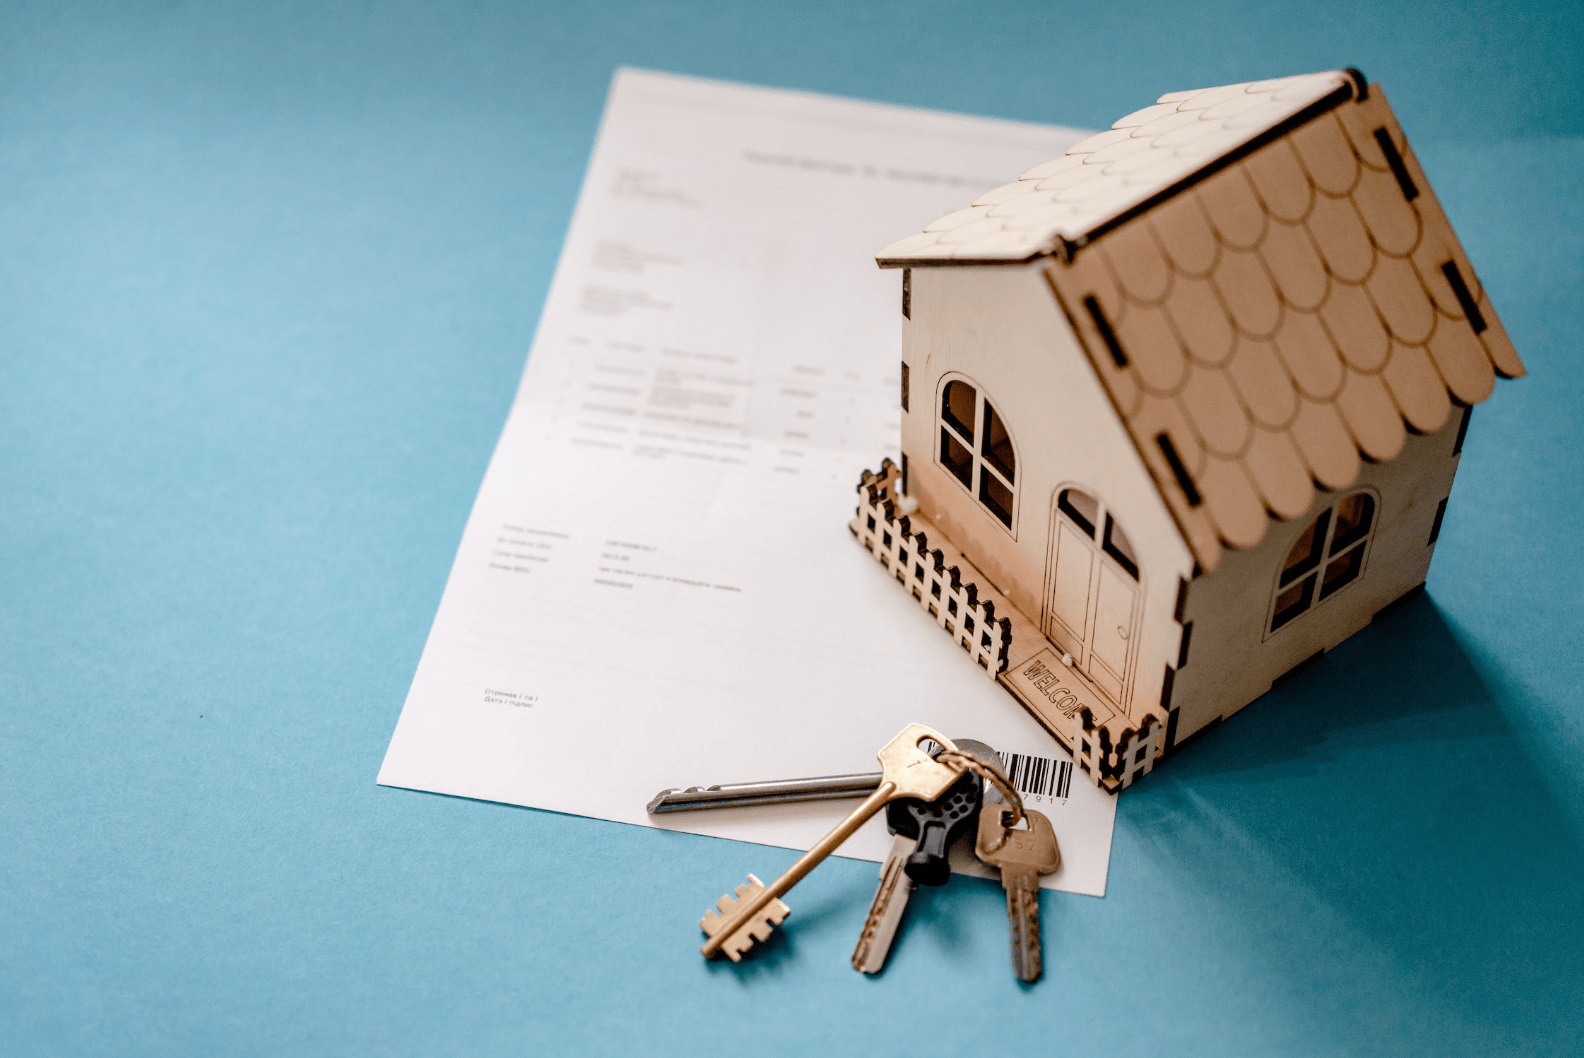 rental agreement document and house keys